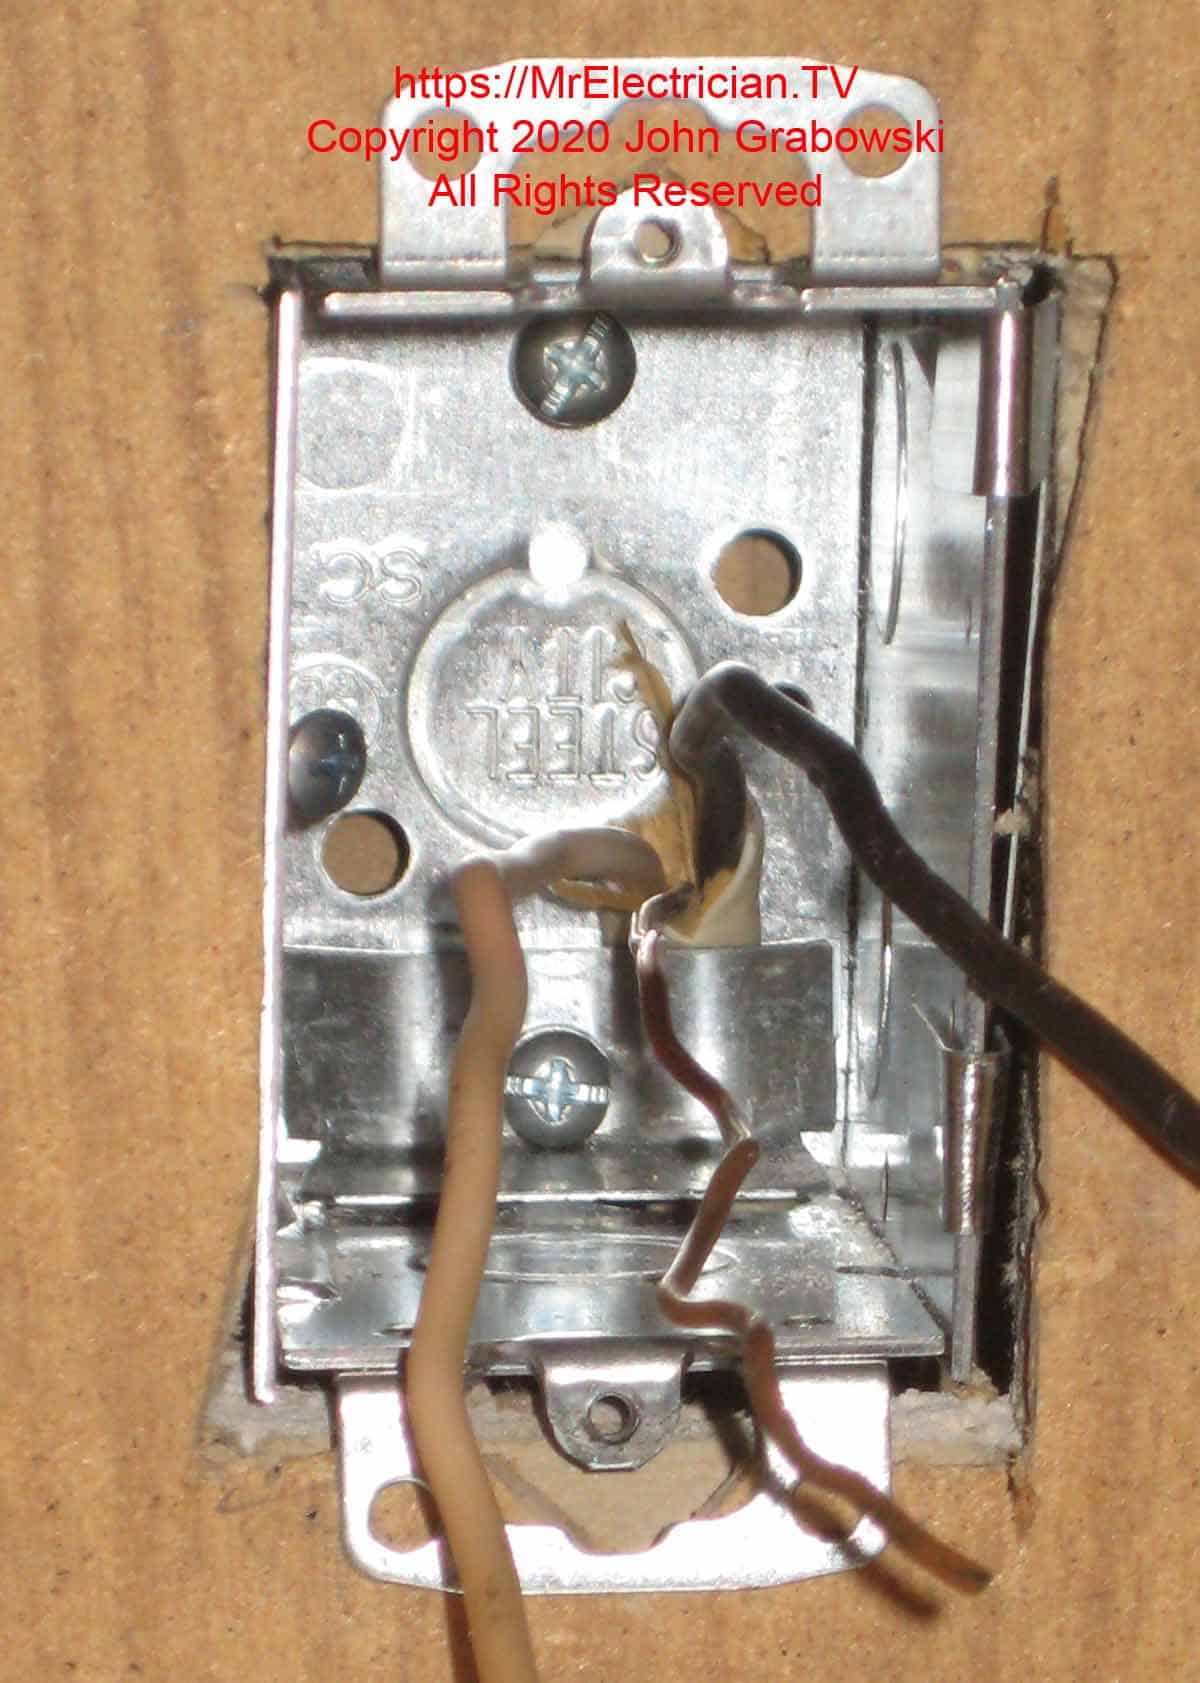 A one gang metal outlet box mounted to the wall with one Madison Bar and one #8 sheet metal screw. The 12/2 cable is entering from the bottom under the cable clamp. The upper cable clamp has been removed and the clamp screw has been reinstalled for grounding the box